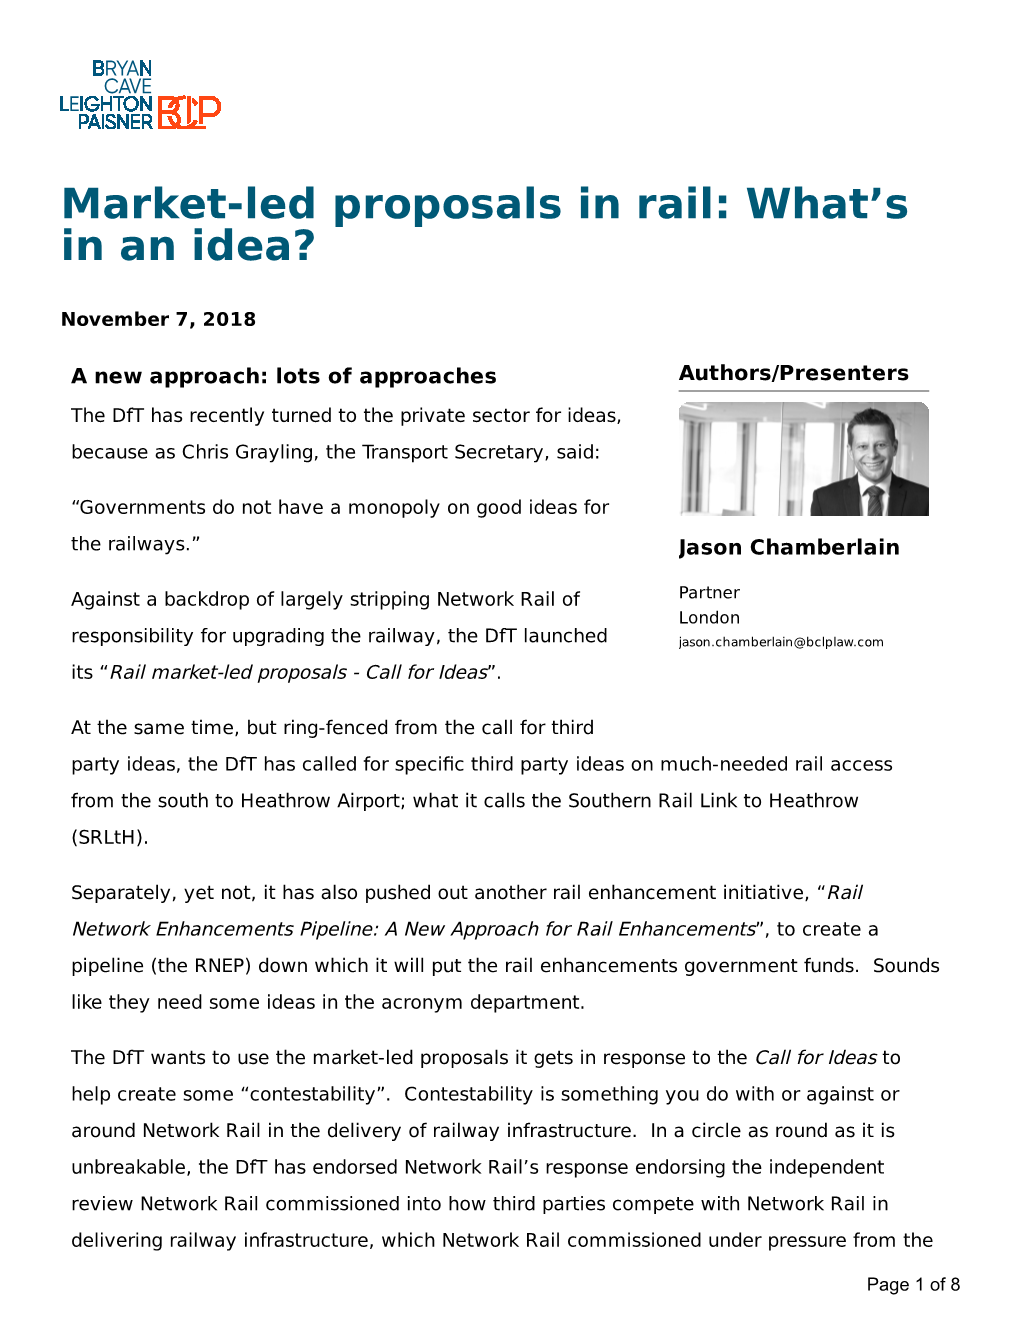 Market-Led Proposals in Rail: What's in an Idea?